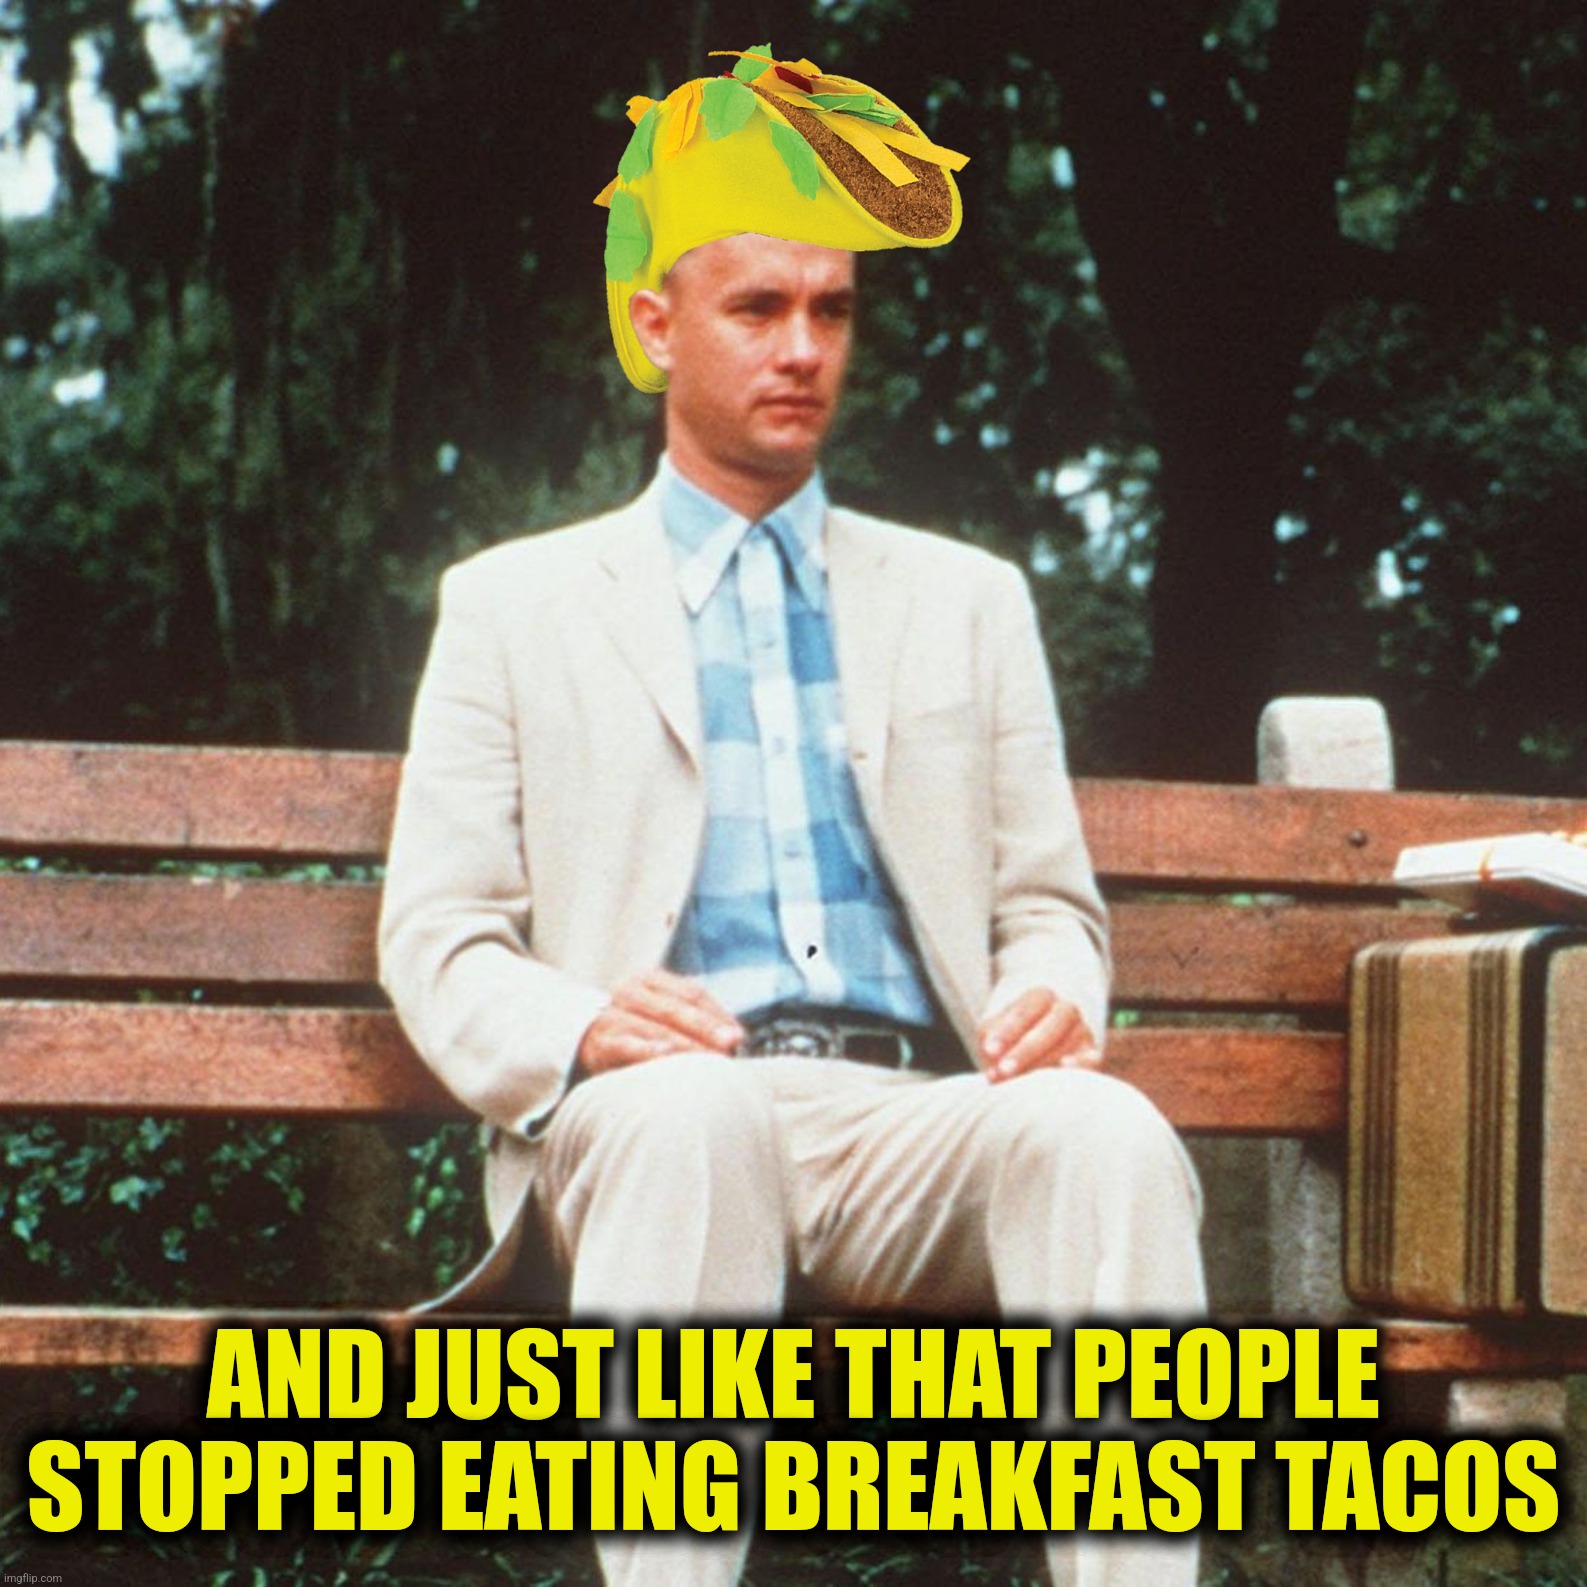 Soylent verde | AND JUST LIKE THAT PEOPLE STOPPED EATING BREAKFAST TACOS | image tagged in bad photoshop,forrest gump,breakfast tacos,taco hat,jill biden | made w/ Imgflip meme maker